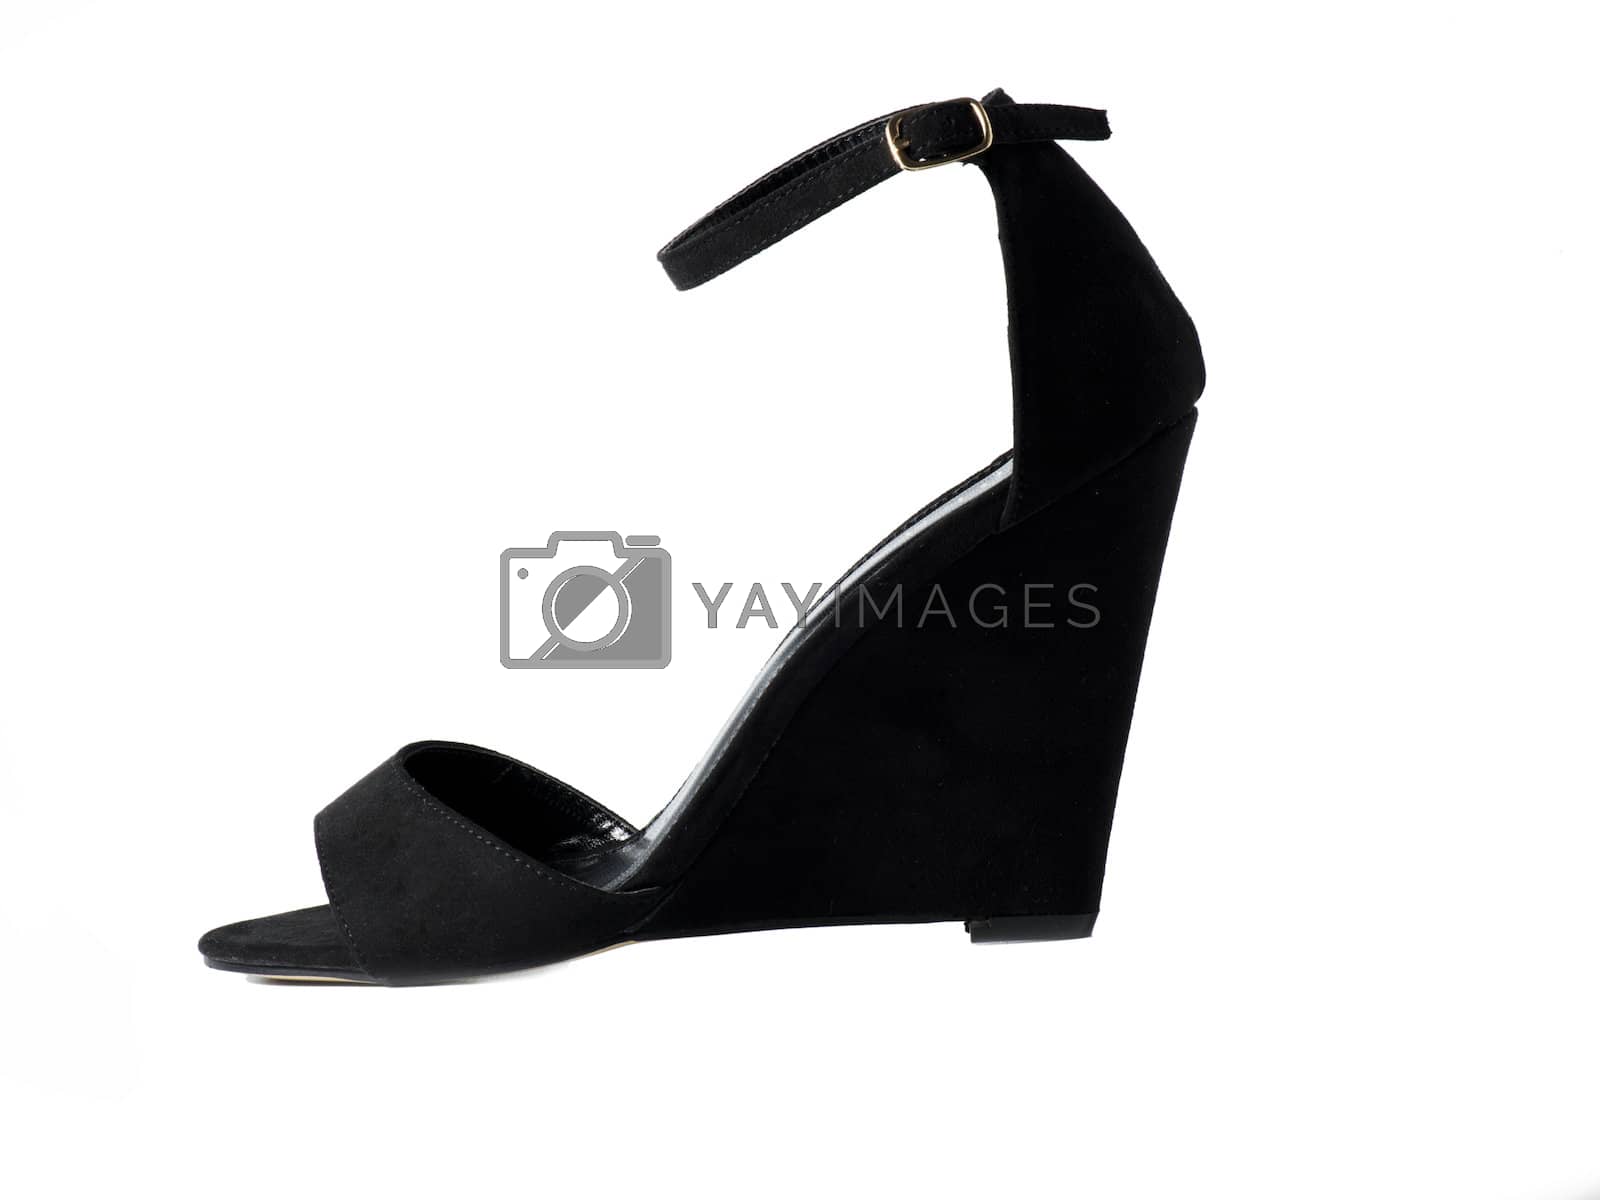 Royalty free image of Woman black shoes on white by marius_dragne